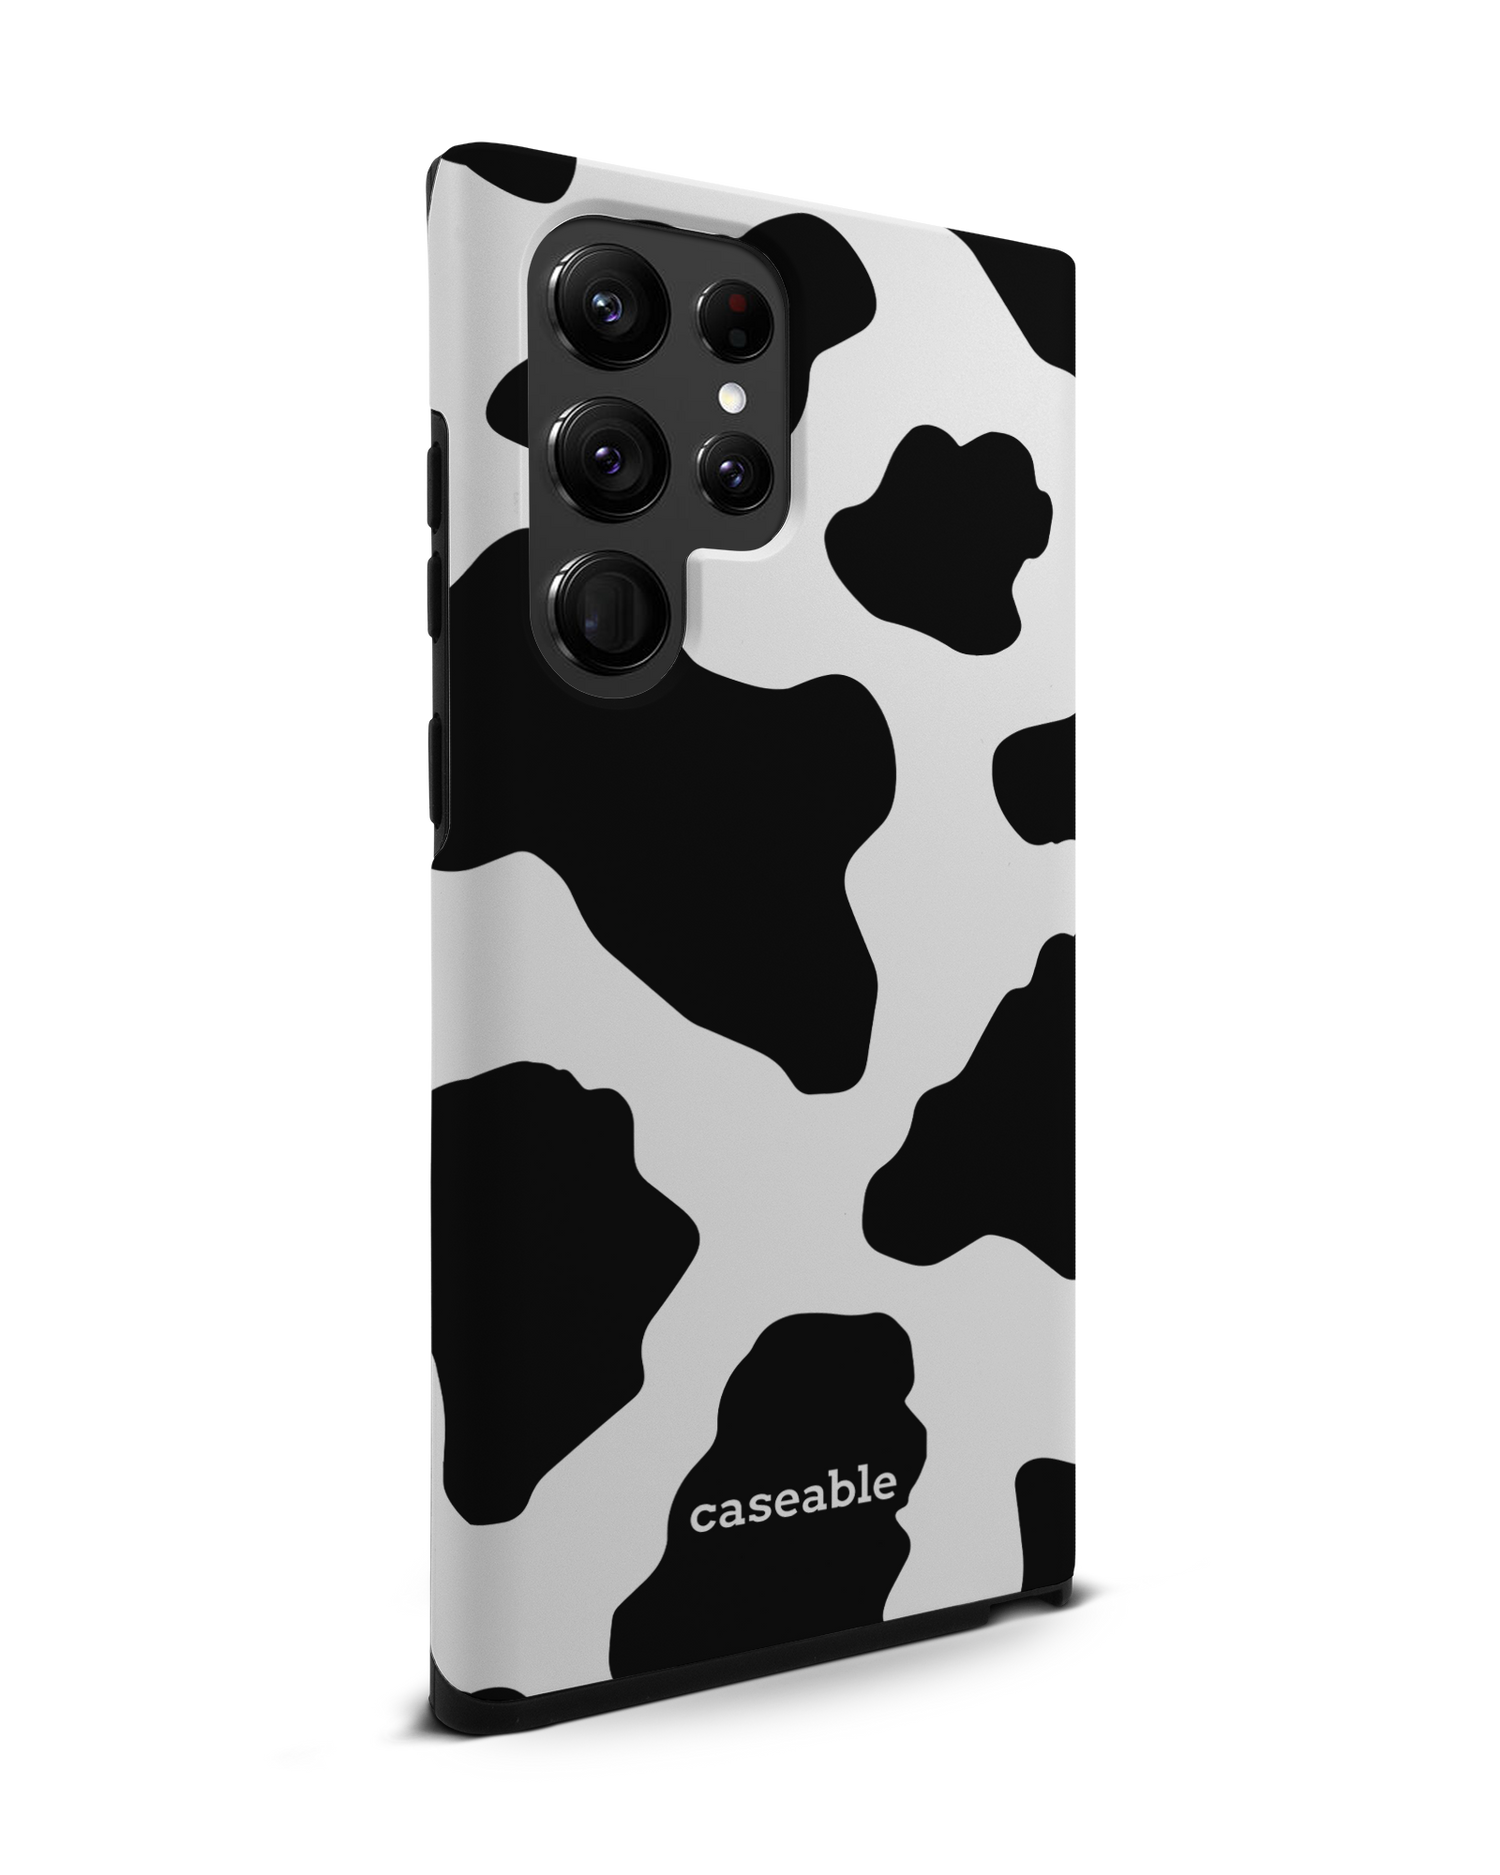 Cow Print 2 Premium Phone Case Samsung Galaxy S22 Ultra 5G: View from the left side